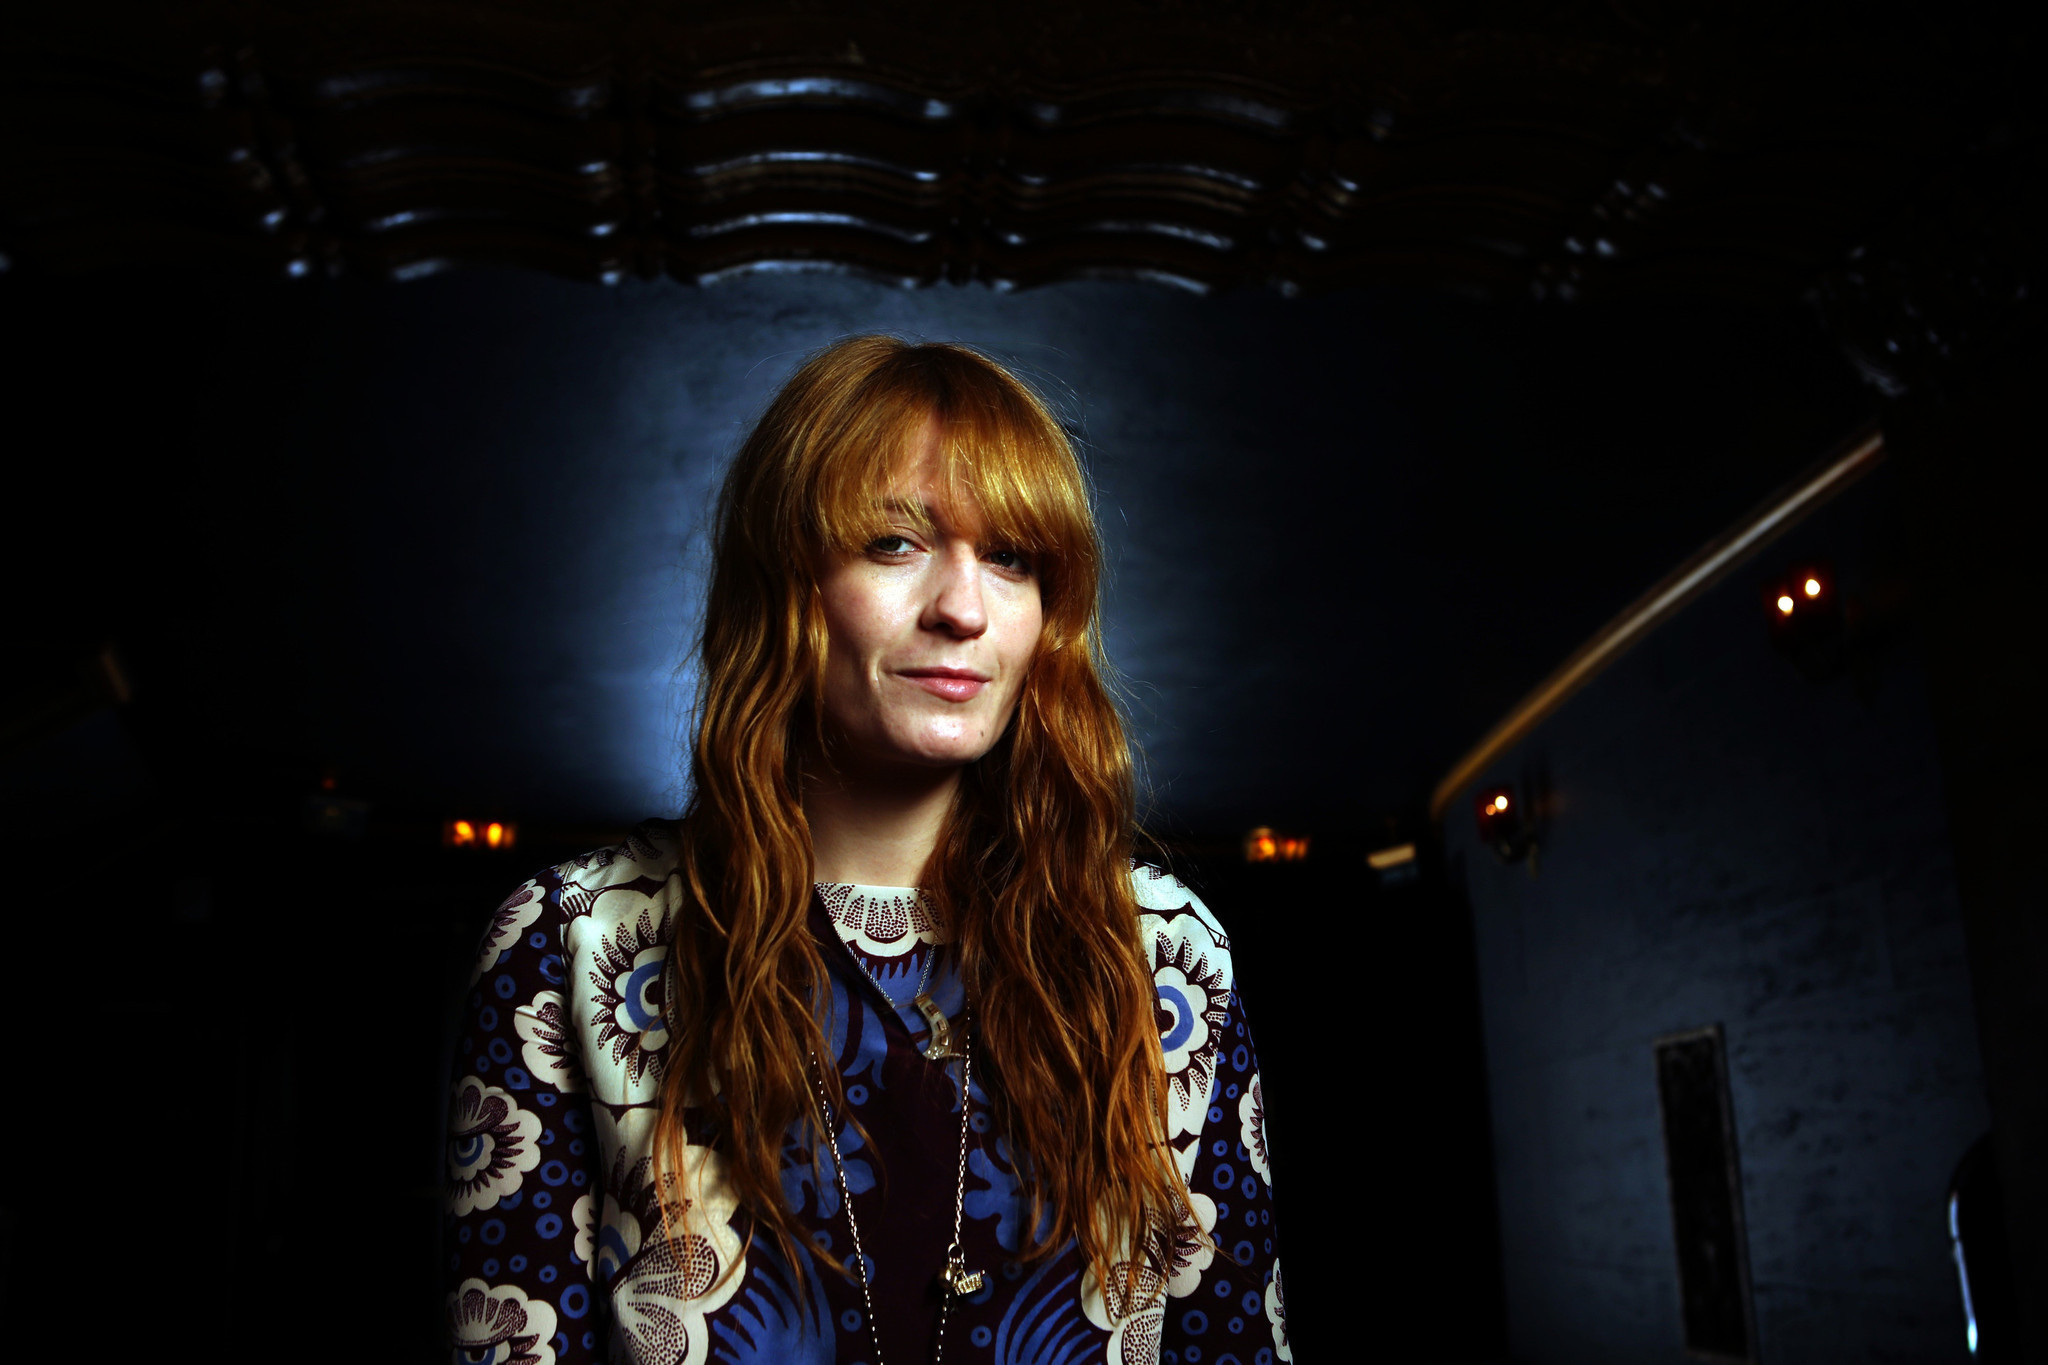 Florence And The Machine Backgrounds, Compatible - PC, Mobile, Gadgets| 2048x1365 px